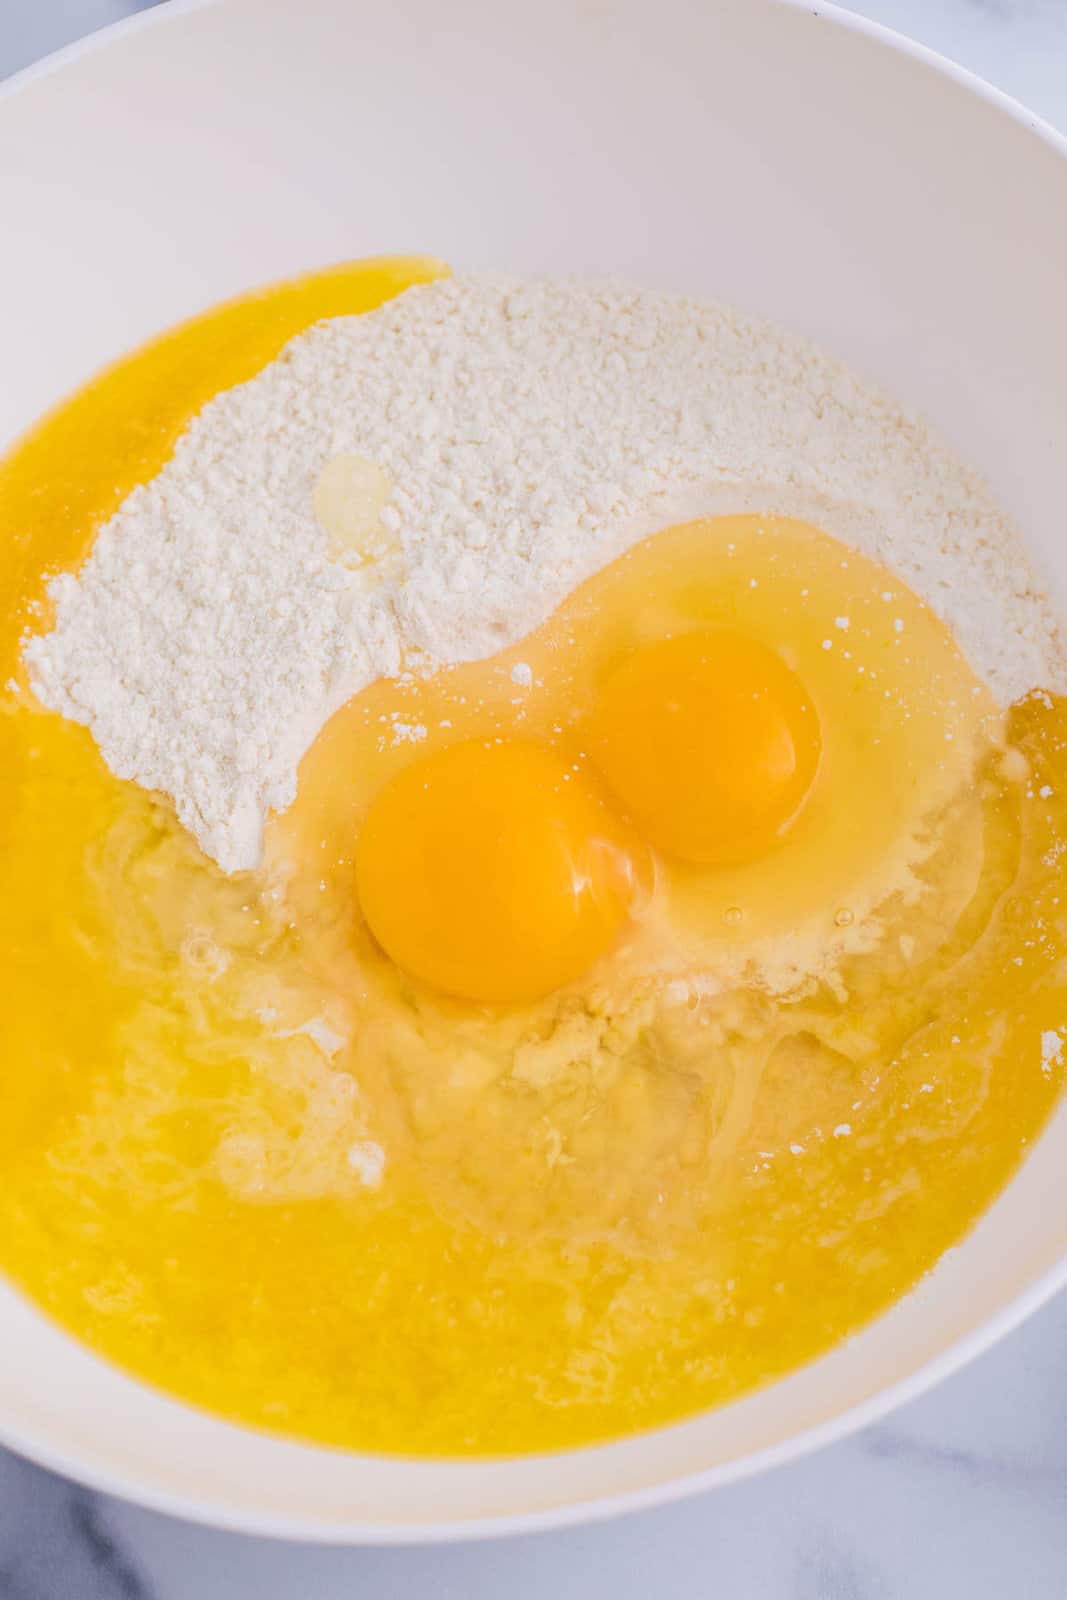 Eggs, lemon extract, and cake mix in a mixing bowl.